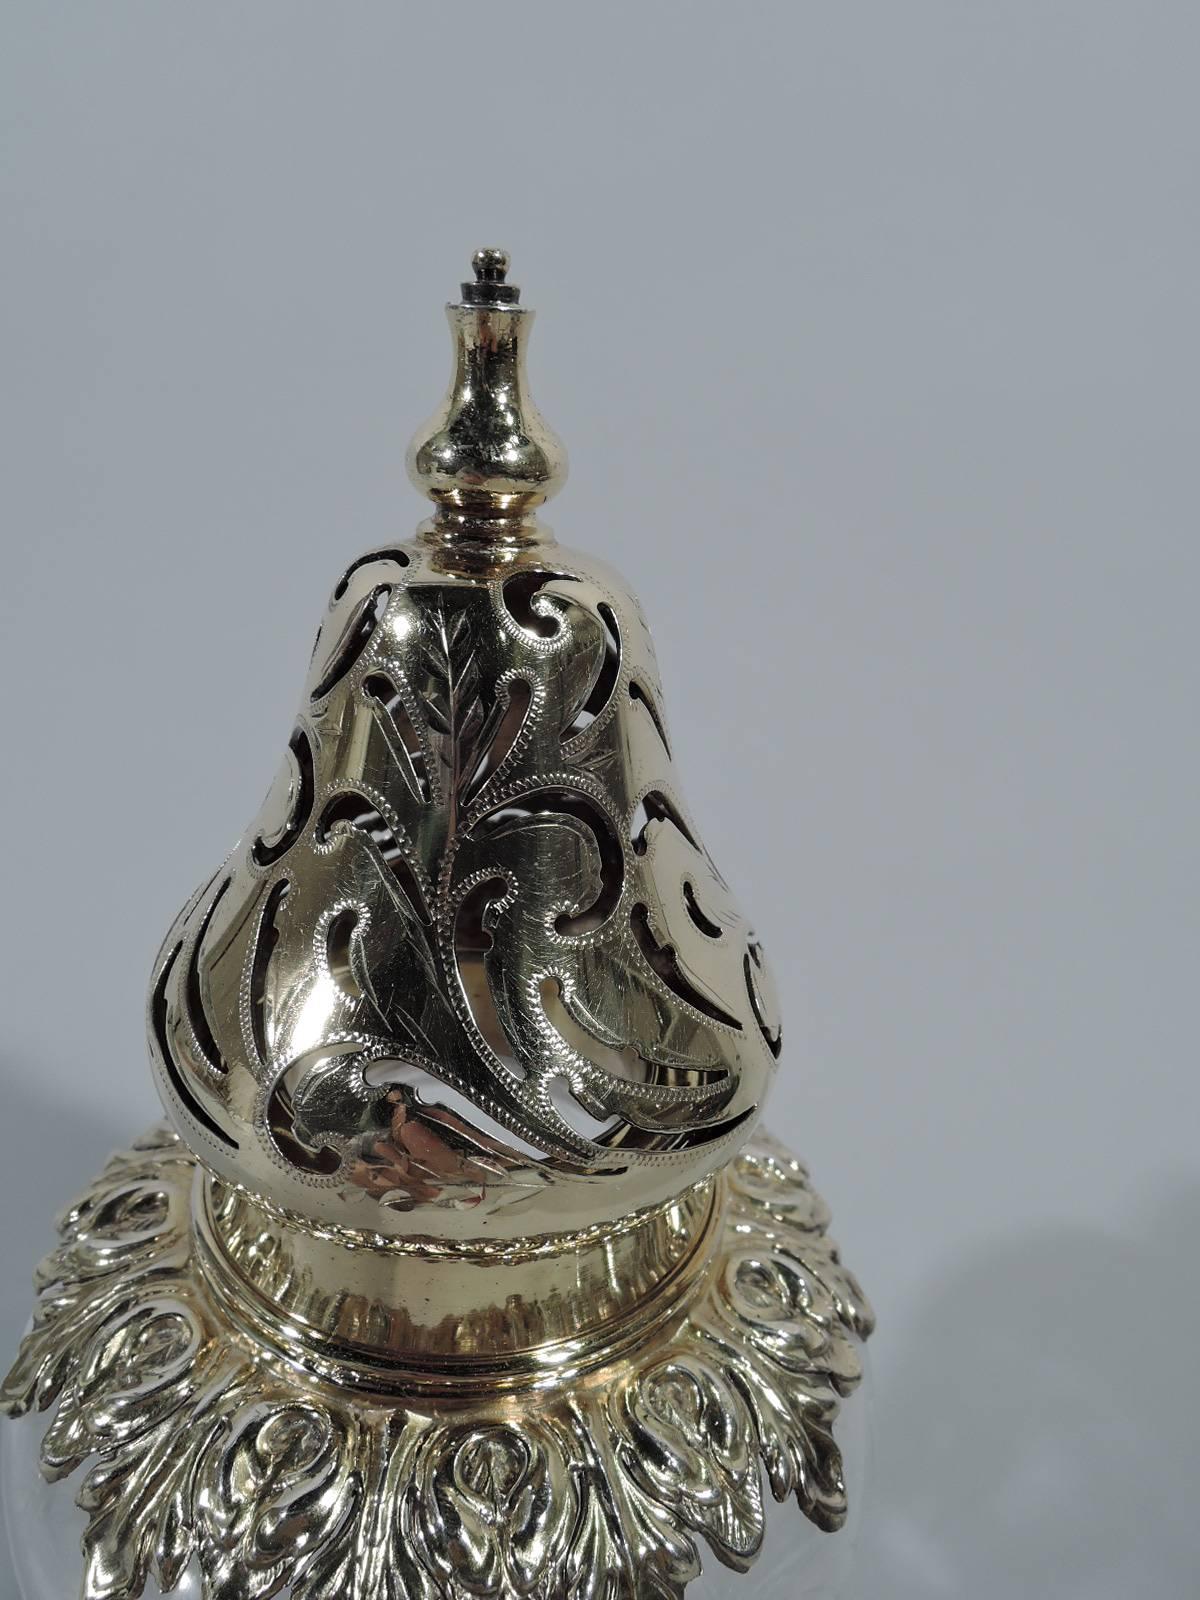 Edwardian Antique American Gilt Sterling Silver and Crystal Sugar Shaker